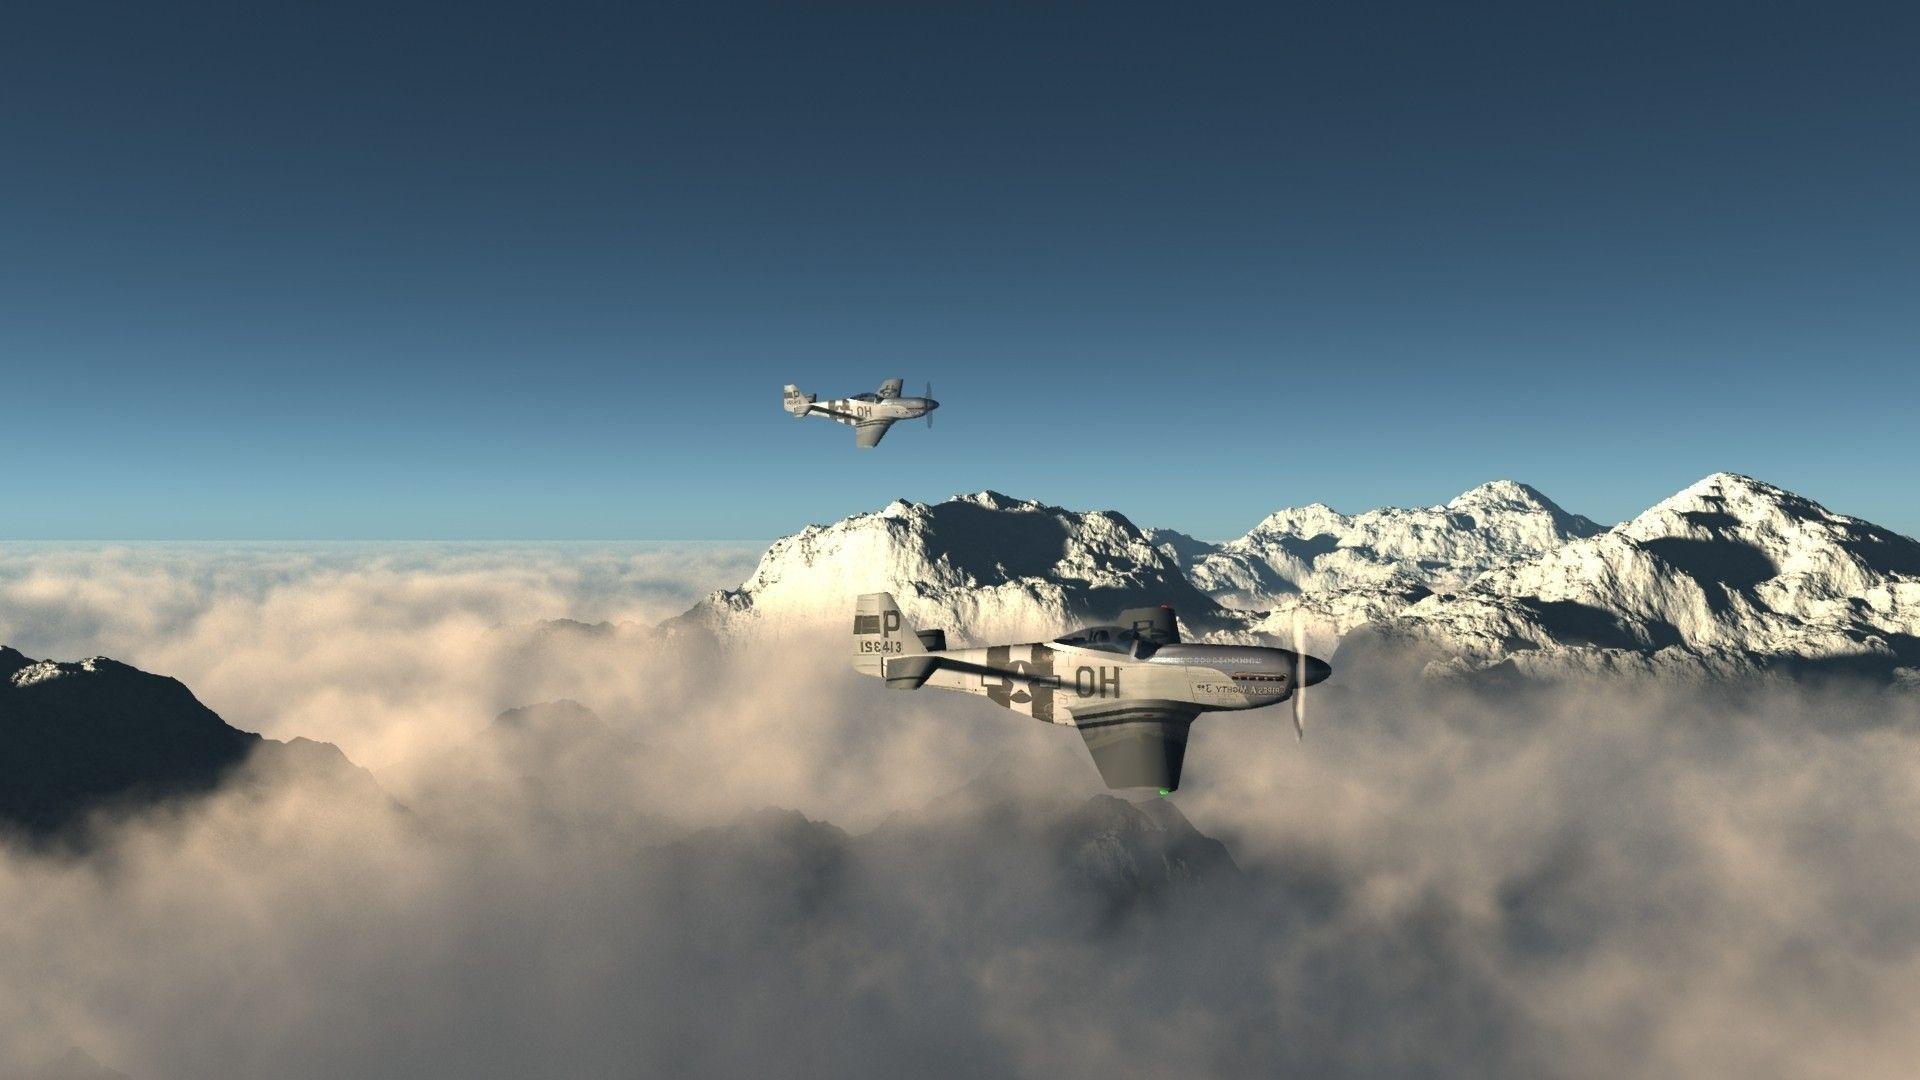 Mustangs, A Couple Of The Flight, The Top Of The Clouds. HQ